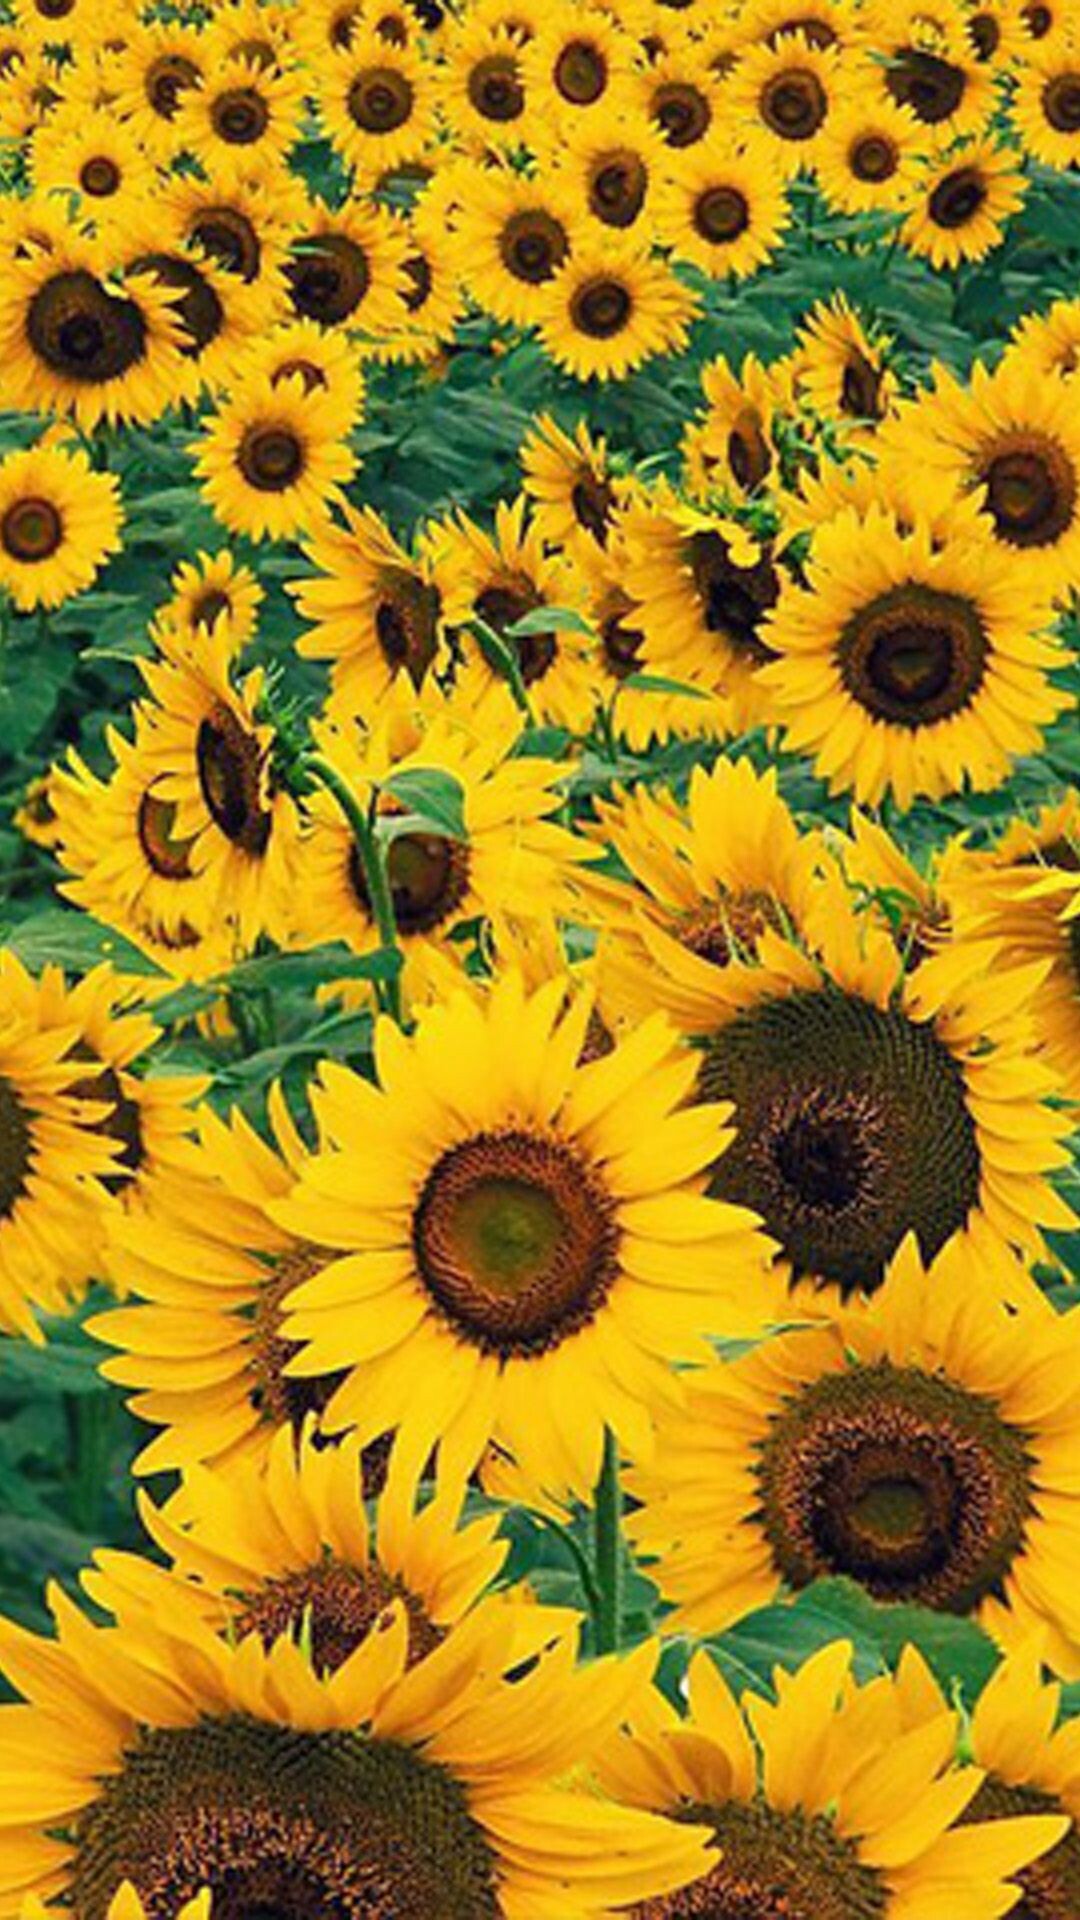 Sunflowers HD Wallpaper for Android